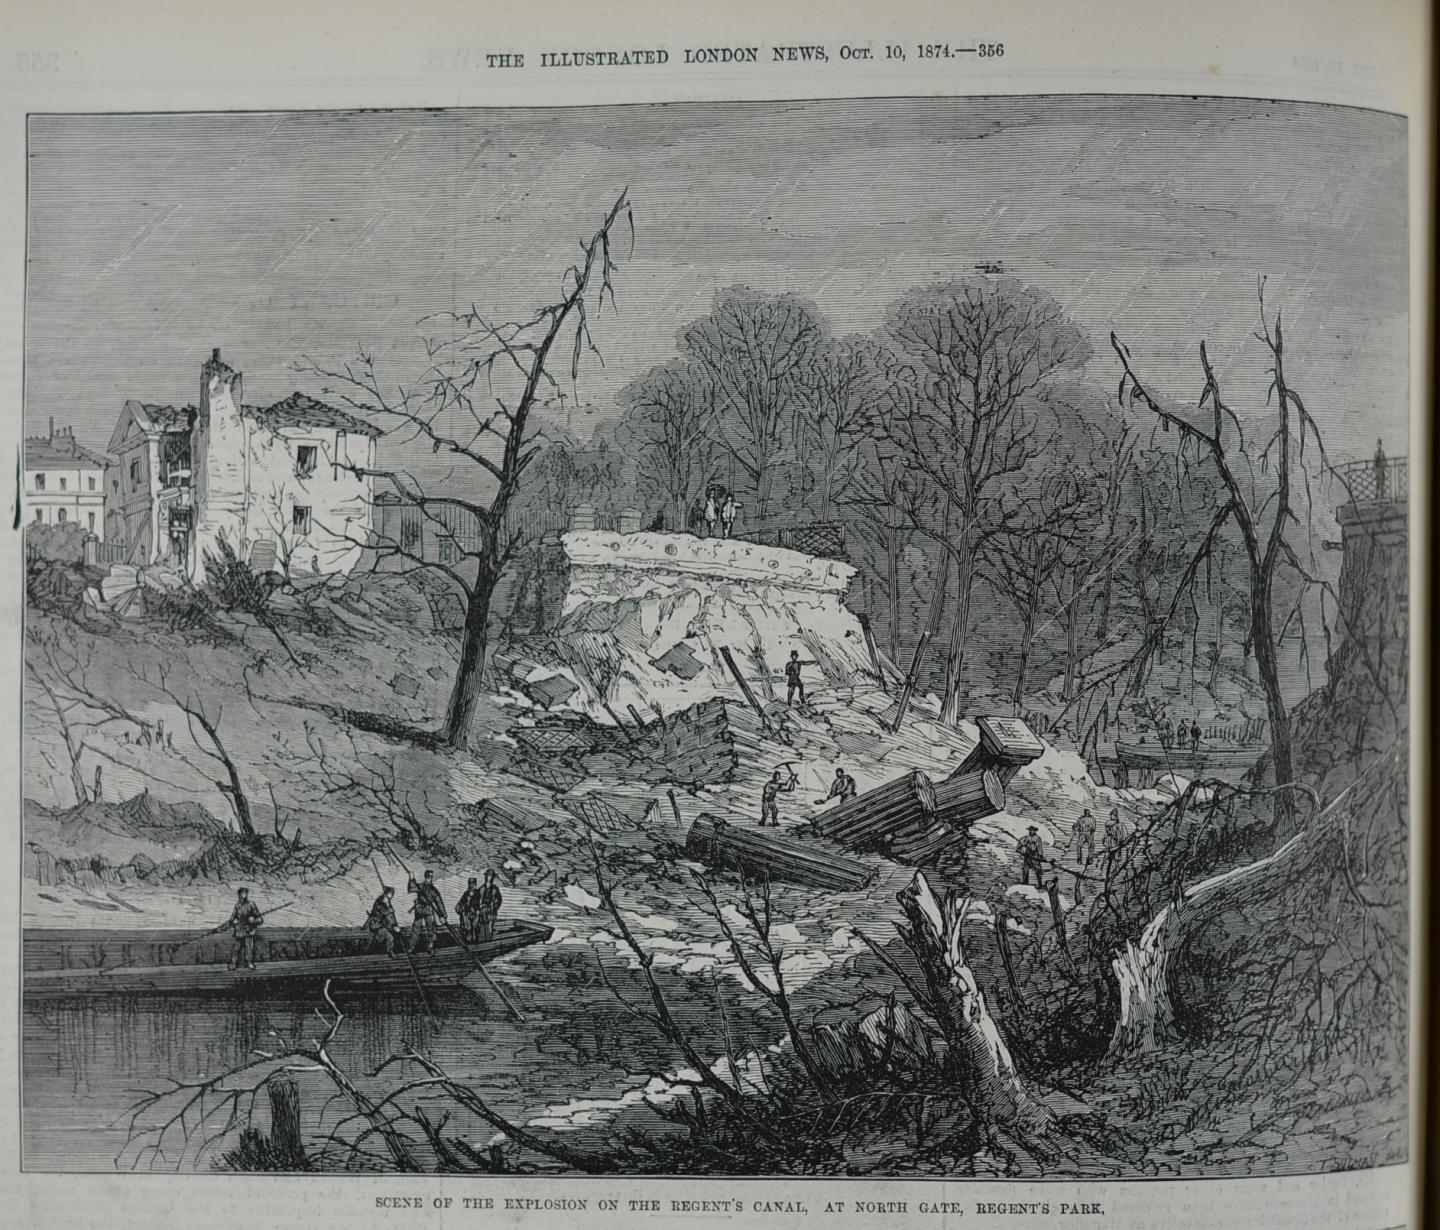 Illustrated London News Oct 10 1874_cropped